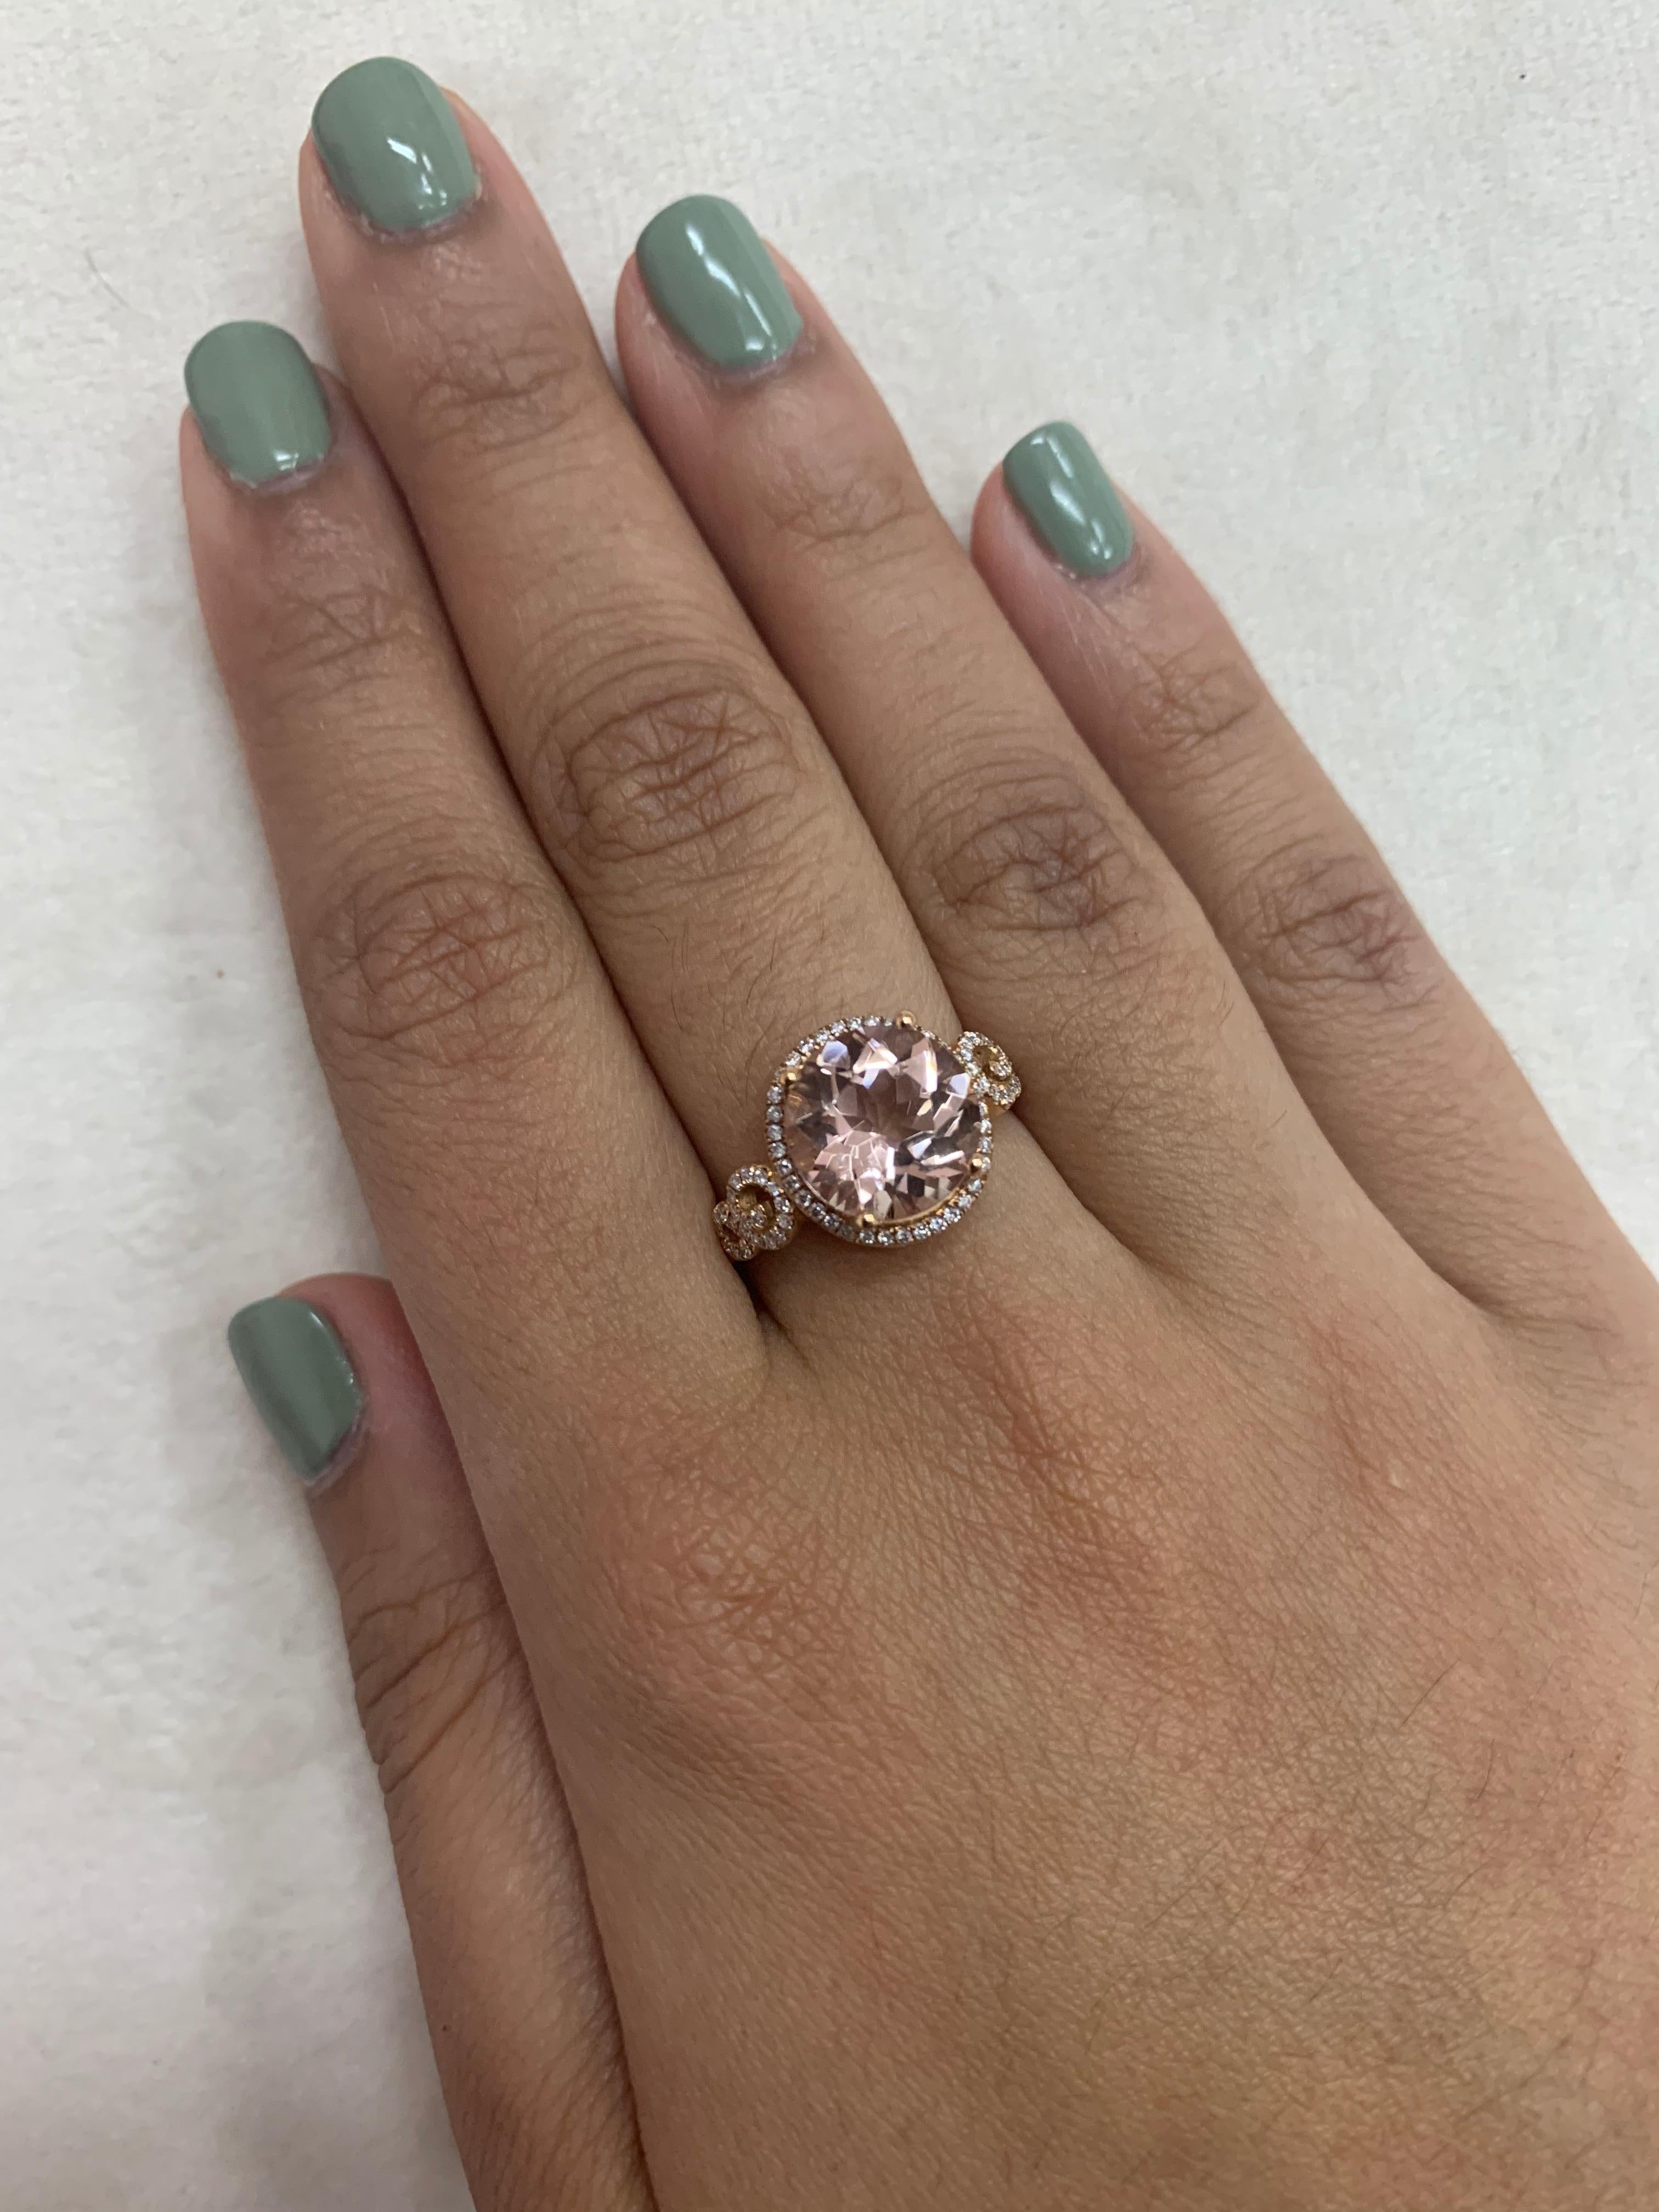 This collection features an array of magnificent morganites! Accented with diamonds these rings are made in rose gold and present a classic yet elegant look. 

Classic morganite ring in 18K rose gold with diamonds. 

Morganite: 3.59 carat oval